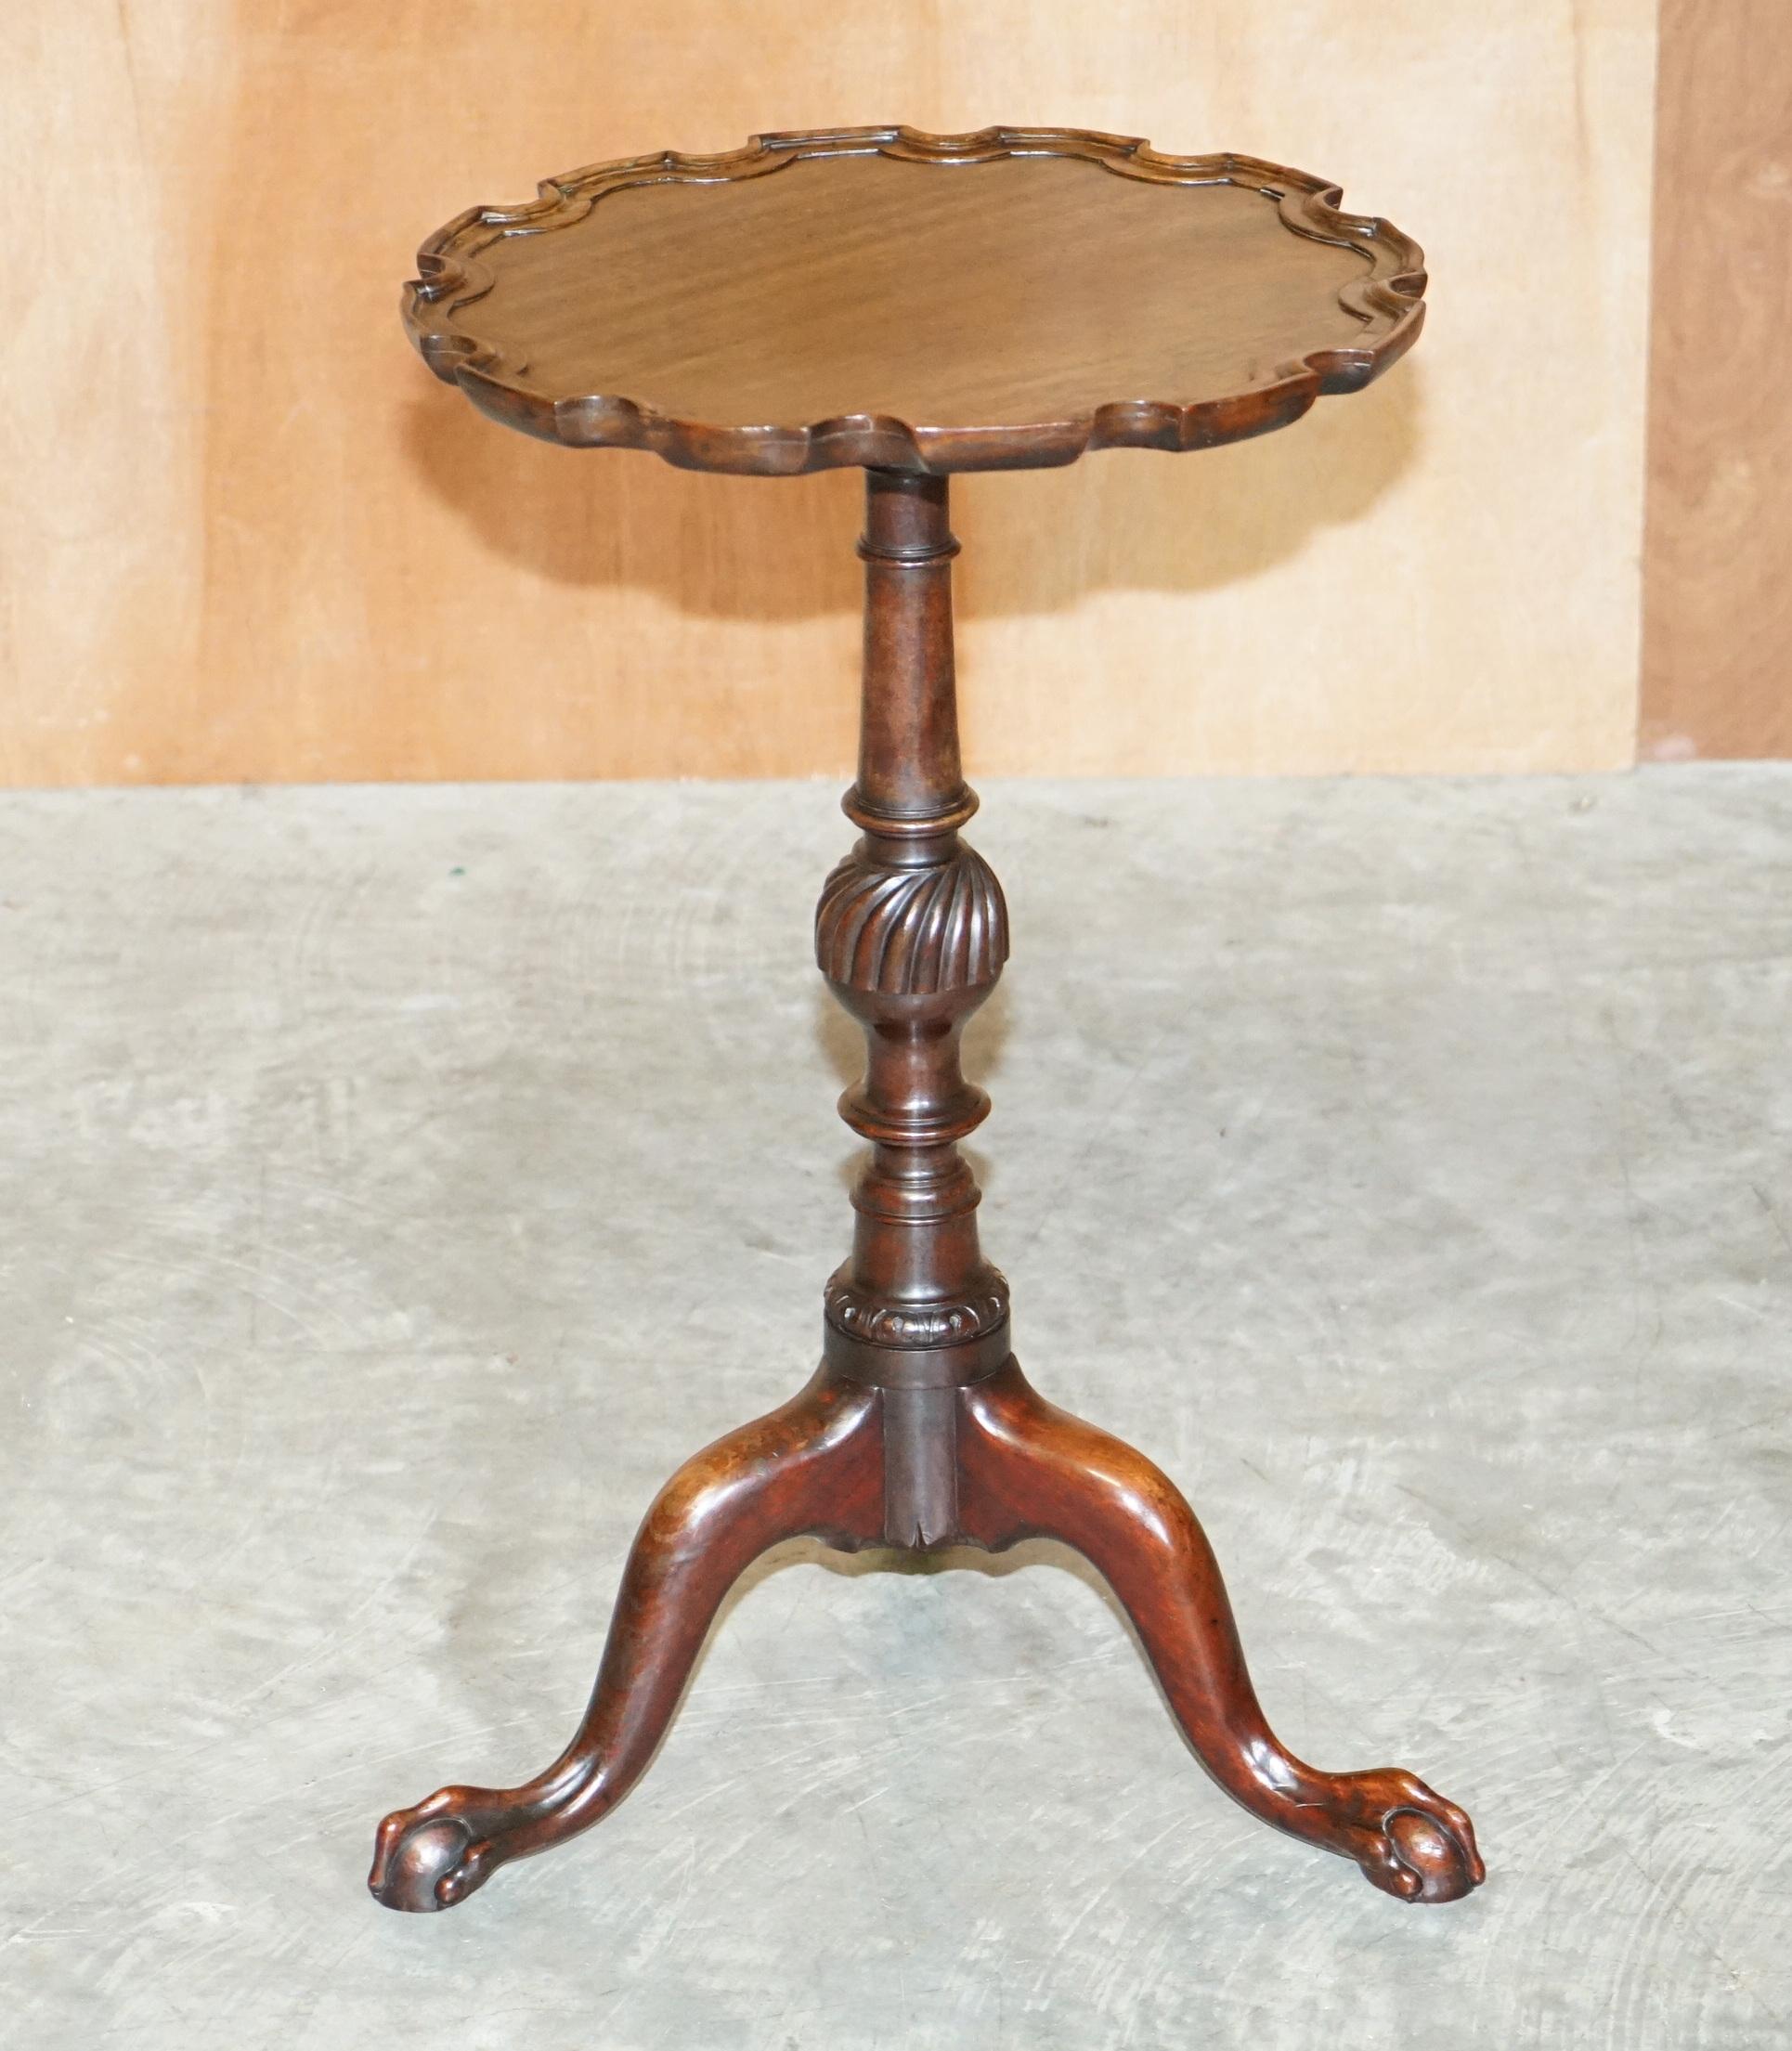 We are delighted to offer for sale this very fine antique mahogany pie crust edge tripod table from Gillows of Lancaster 

A very good looking well made and decorative piece, it sits beautifully in any setting and is very unitarian. This piece